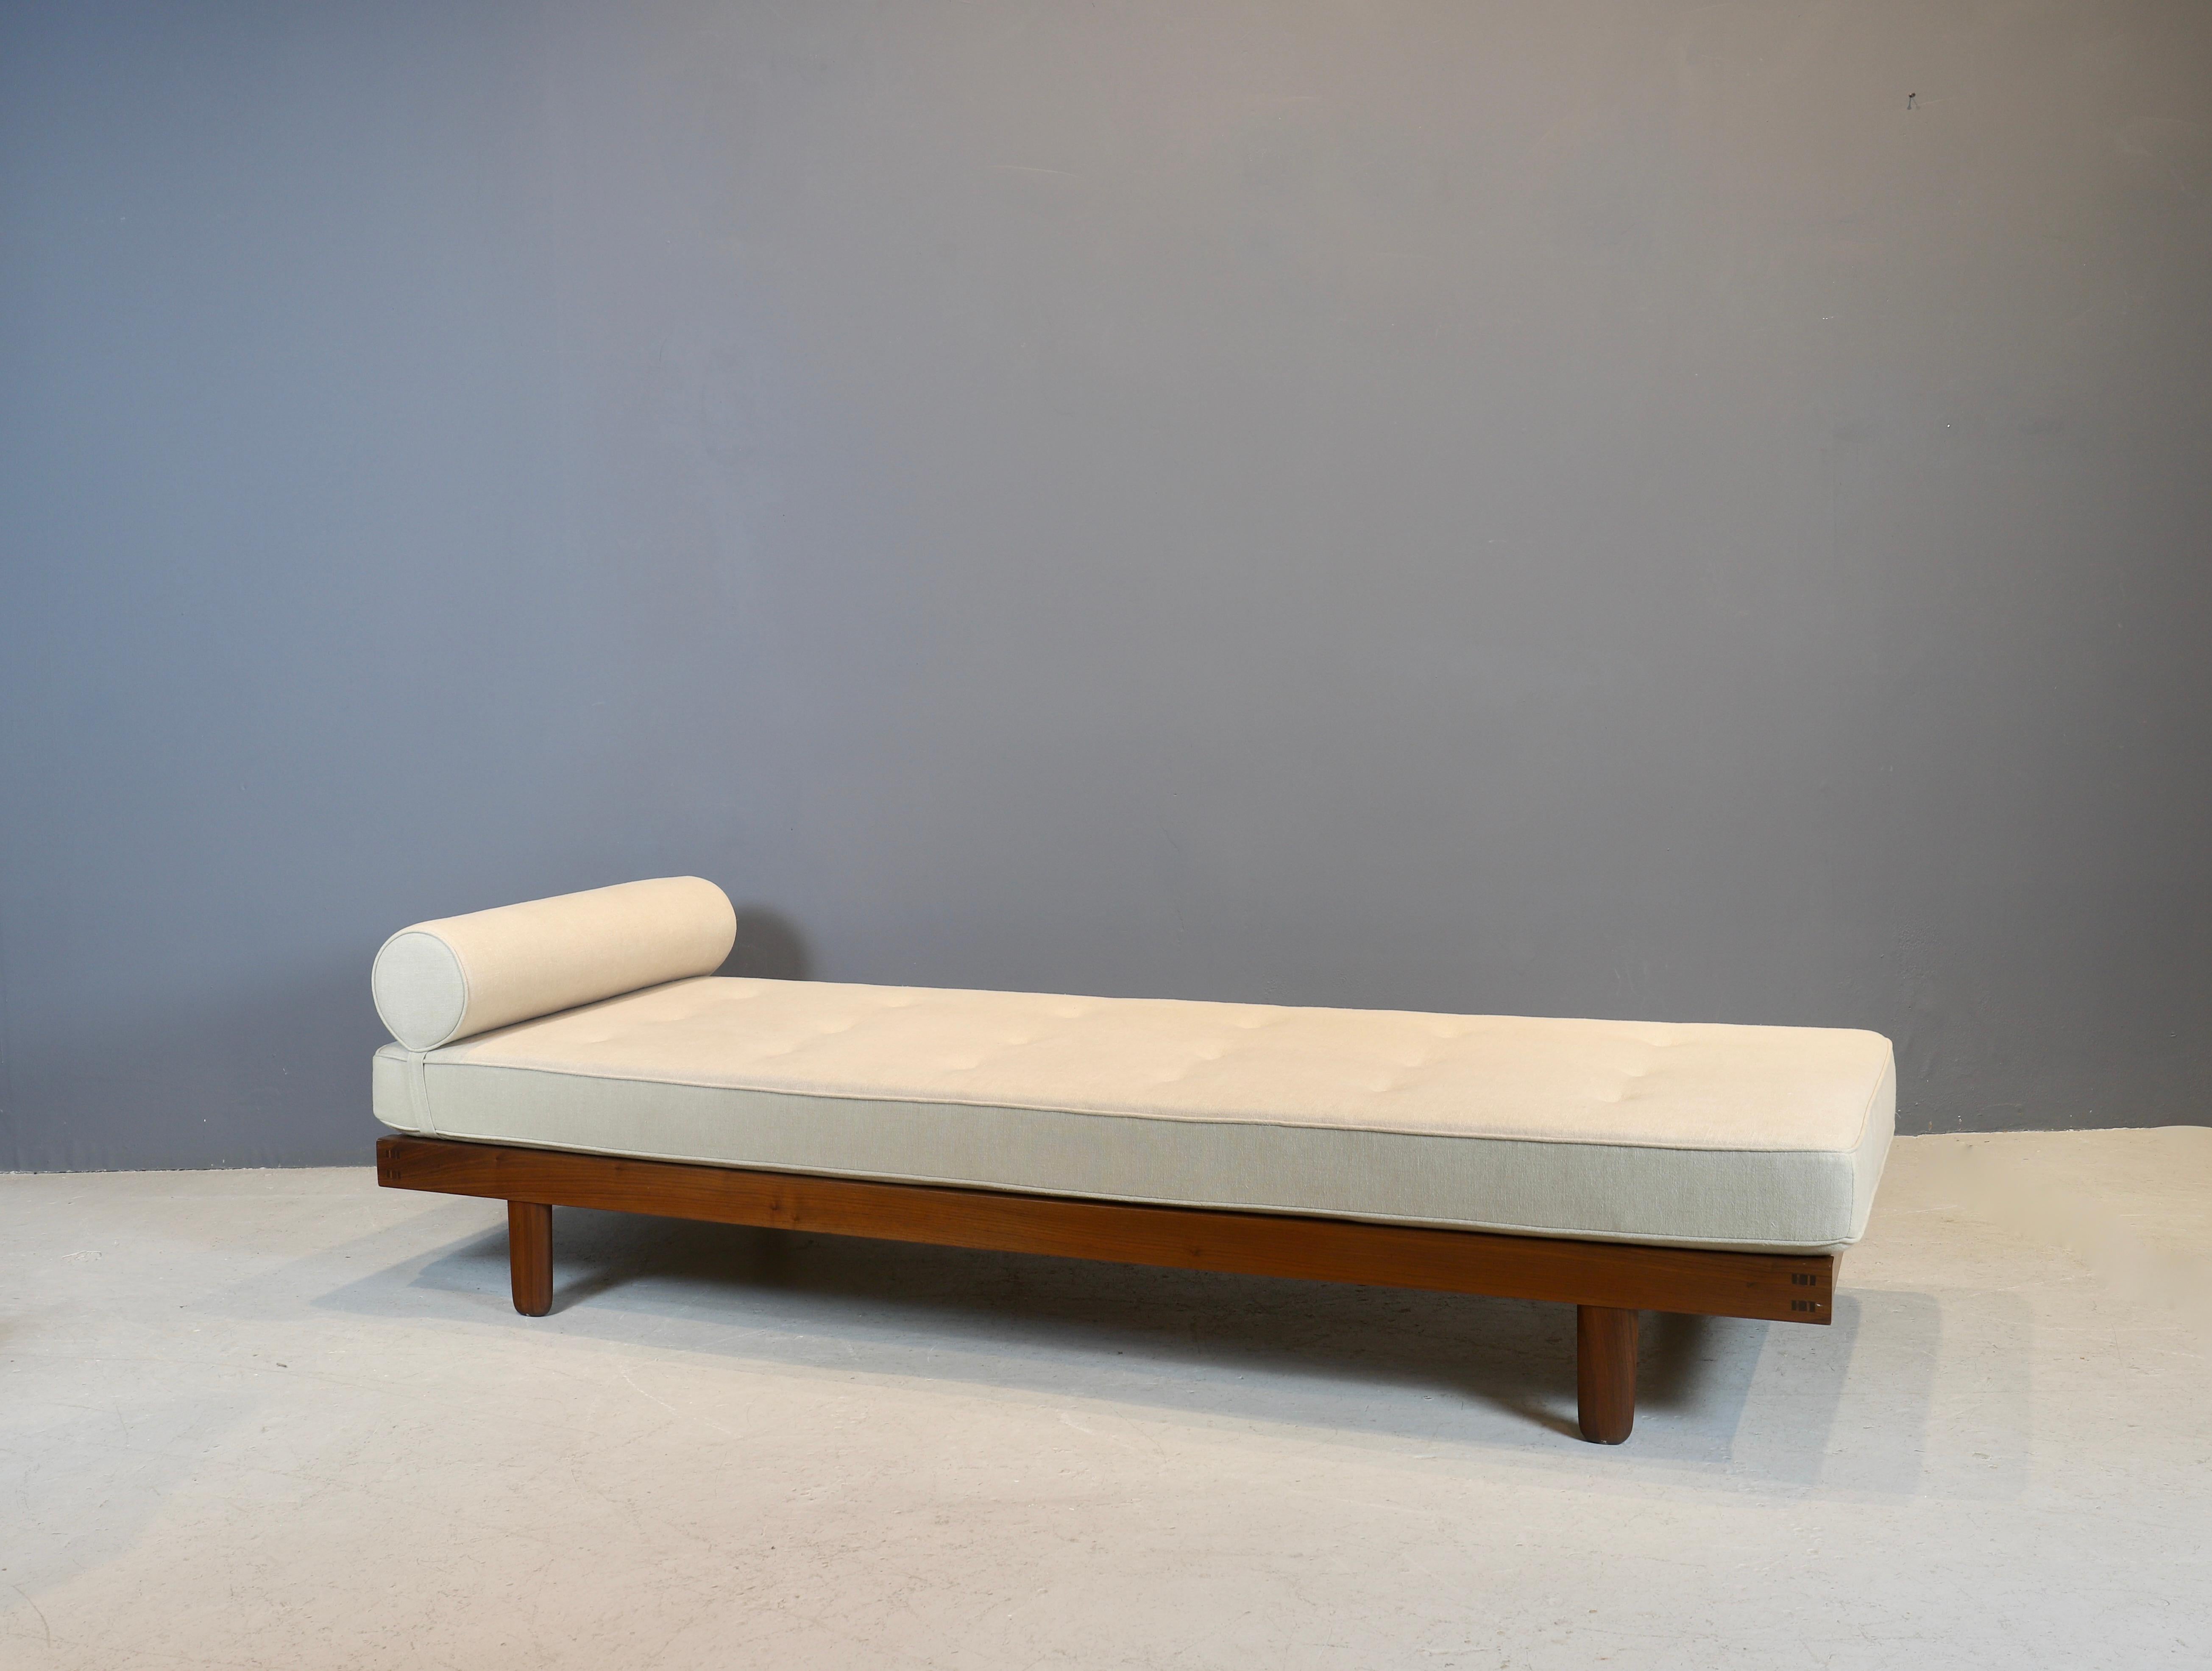 Custom size, extra long daybed by New Hope studio artist George Nakashima, circa 1950s.
Frame is in Black American walnut, retaining its original webbing, with newly made cushion in oatmeal linen.
This daybed is currently in my showroom in